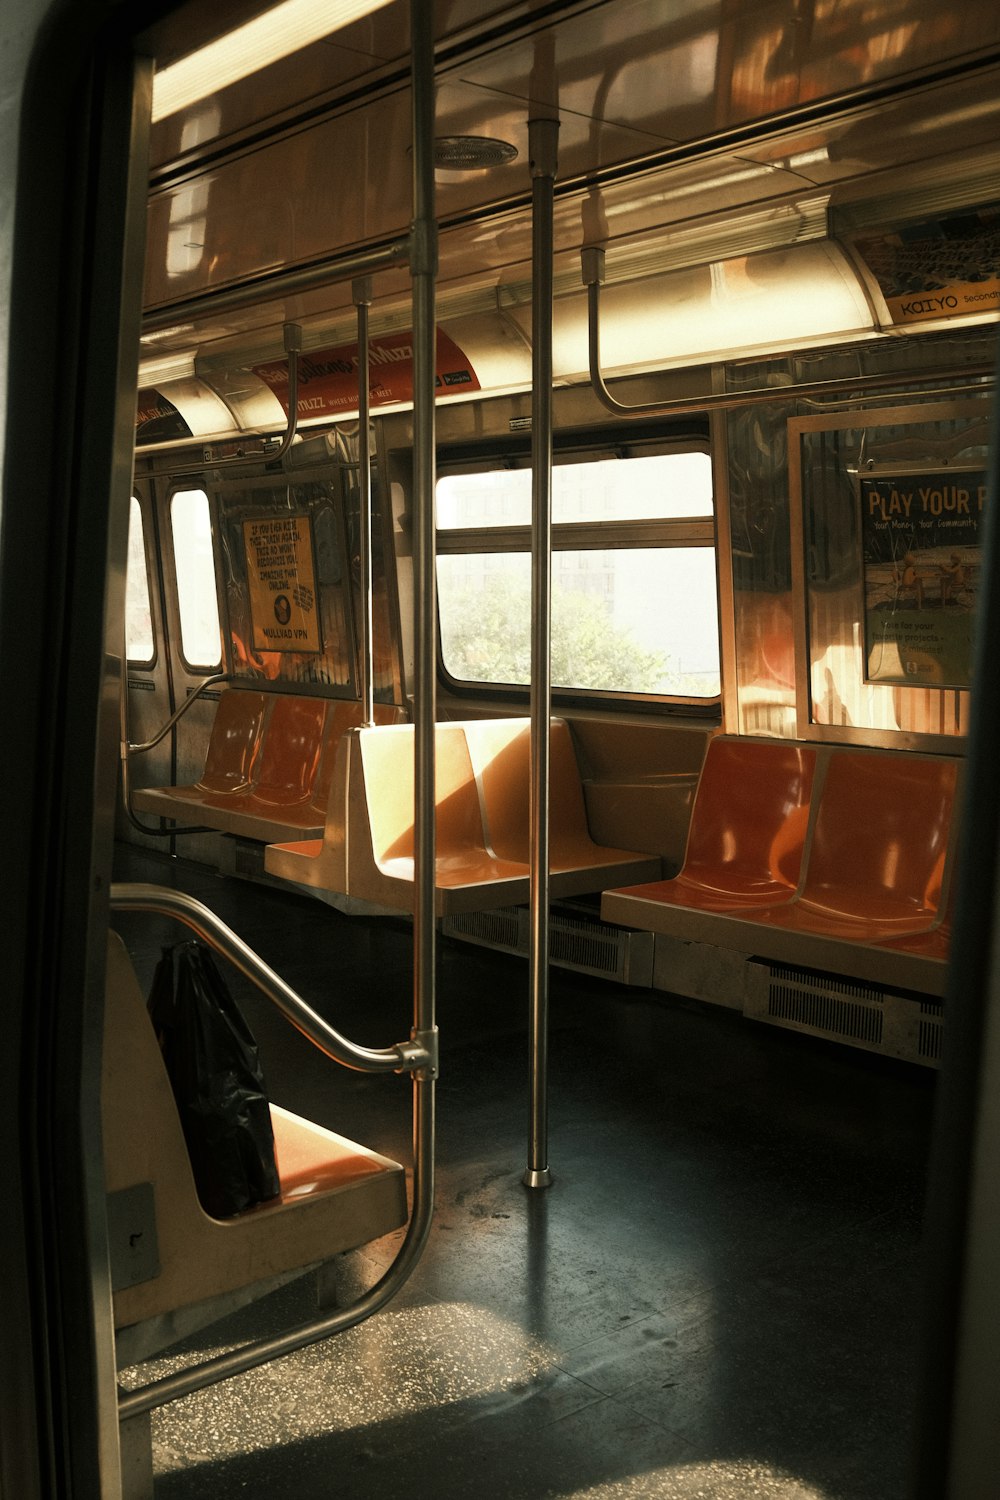 a view of a subway car from inside the car